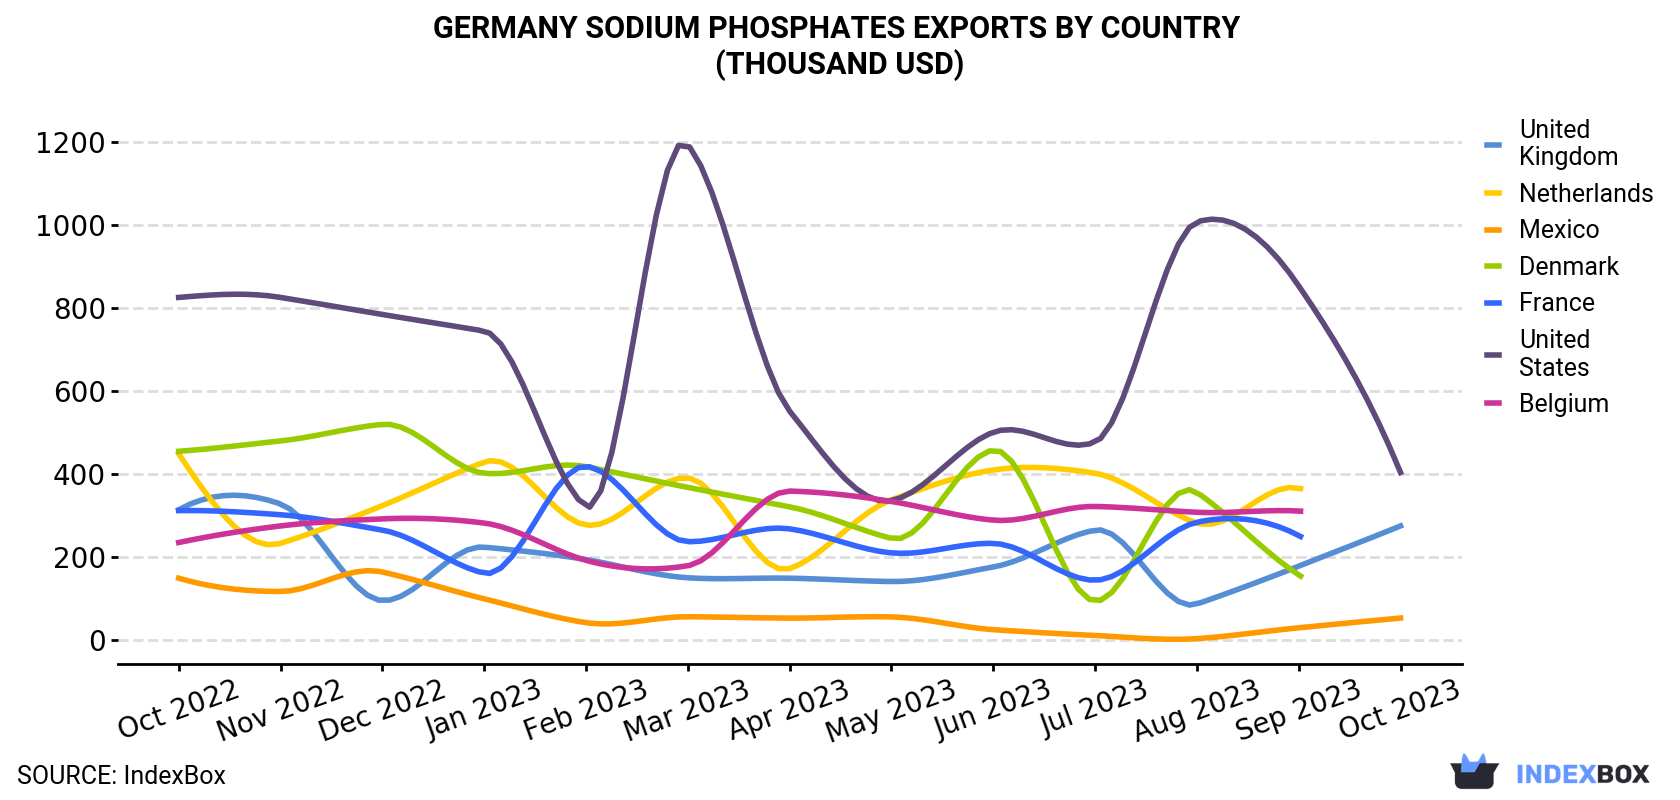 Germany Sodium Phosphates Exports By Country (Thousand USD)